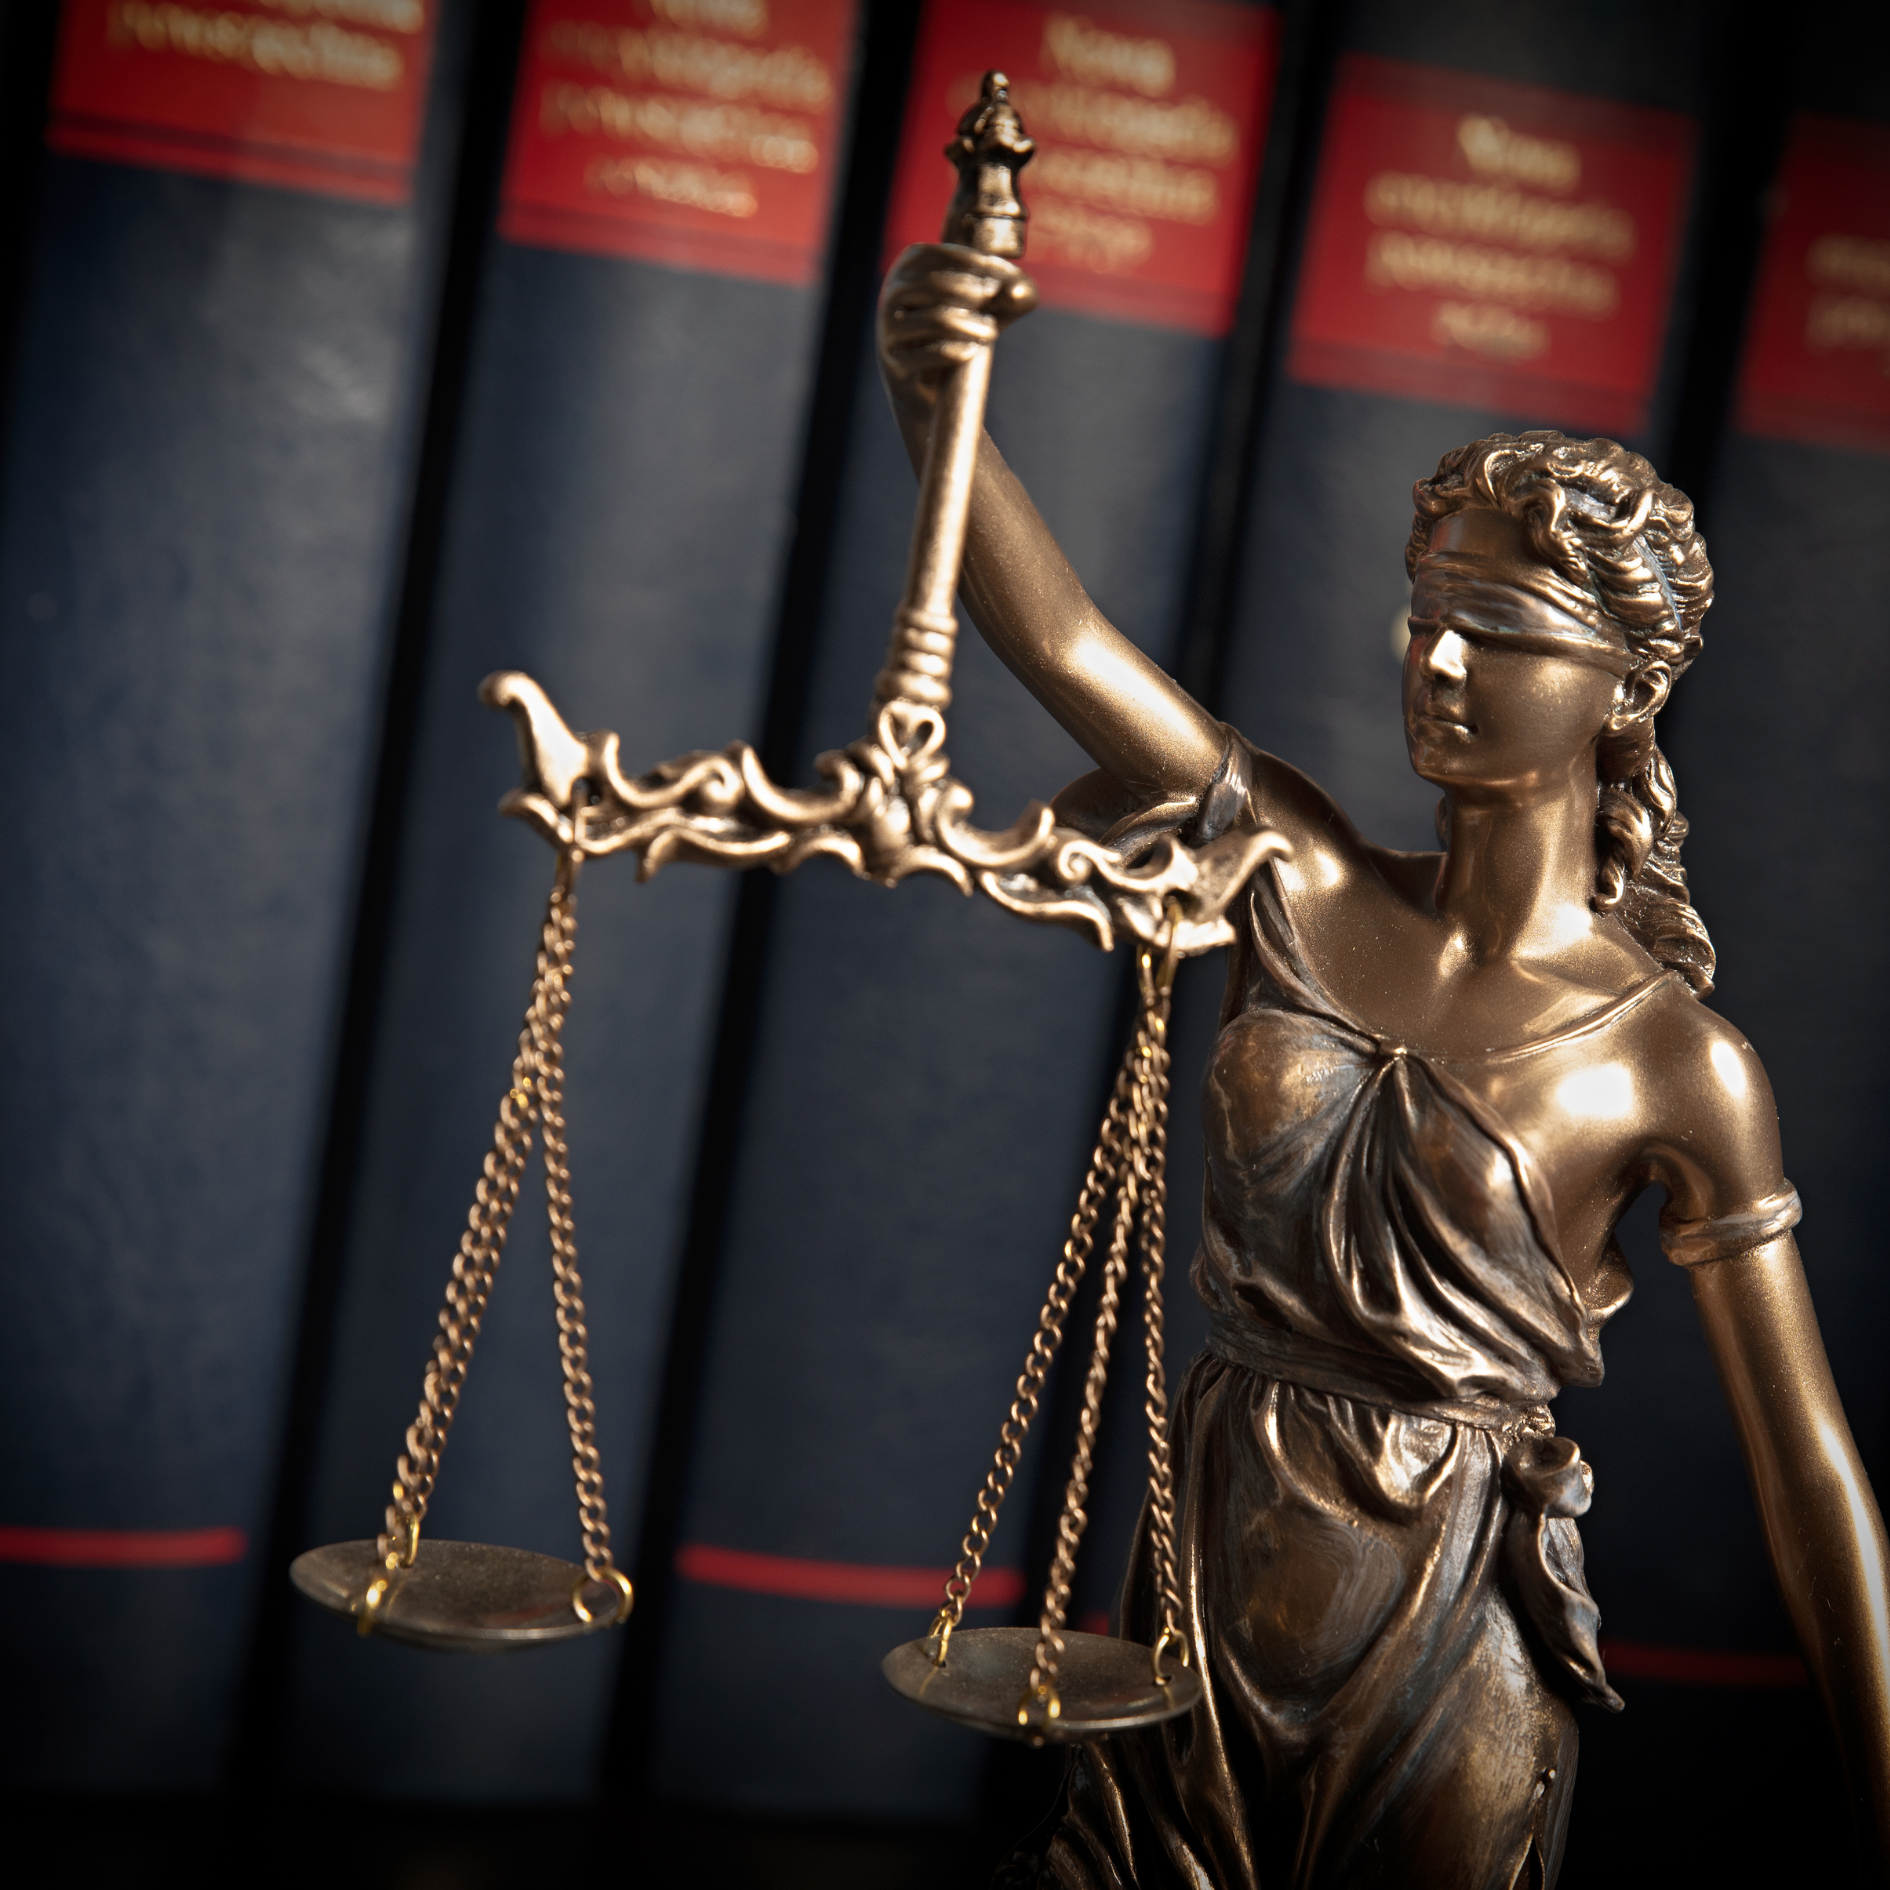 Litigation involving NAR, REMAX, and Anywhere Real Estate